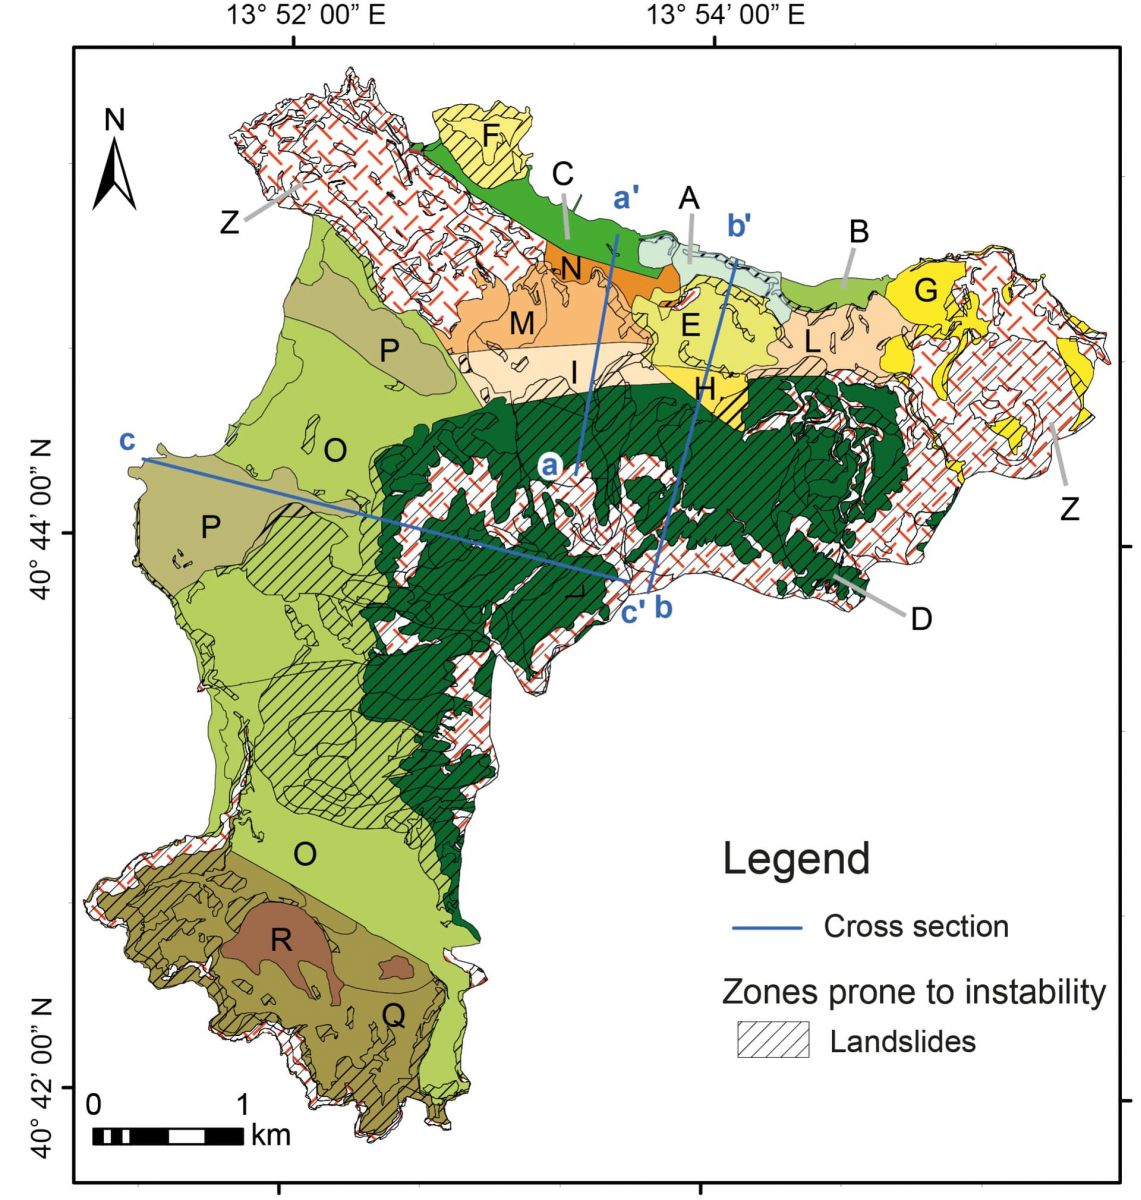 Online l’articolo "Seismic microzonation in a complex volcano-tectonic setting: the case of northern and western Ischia Island (southern Italy)"